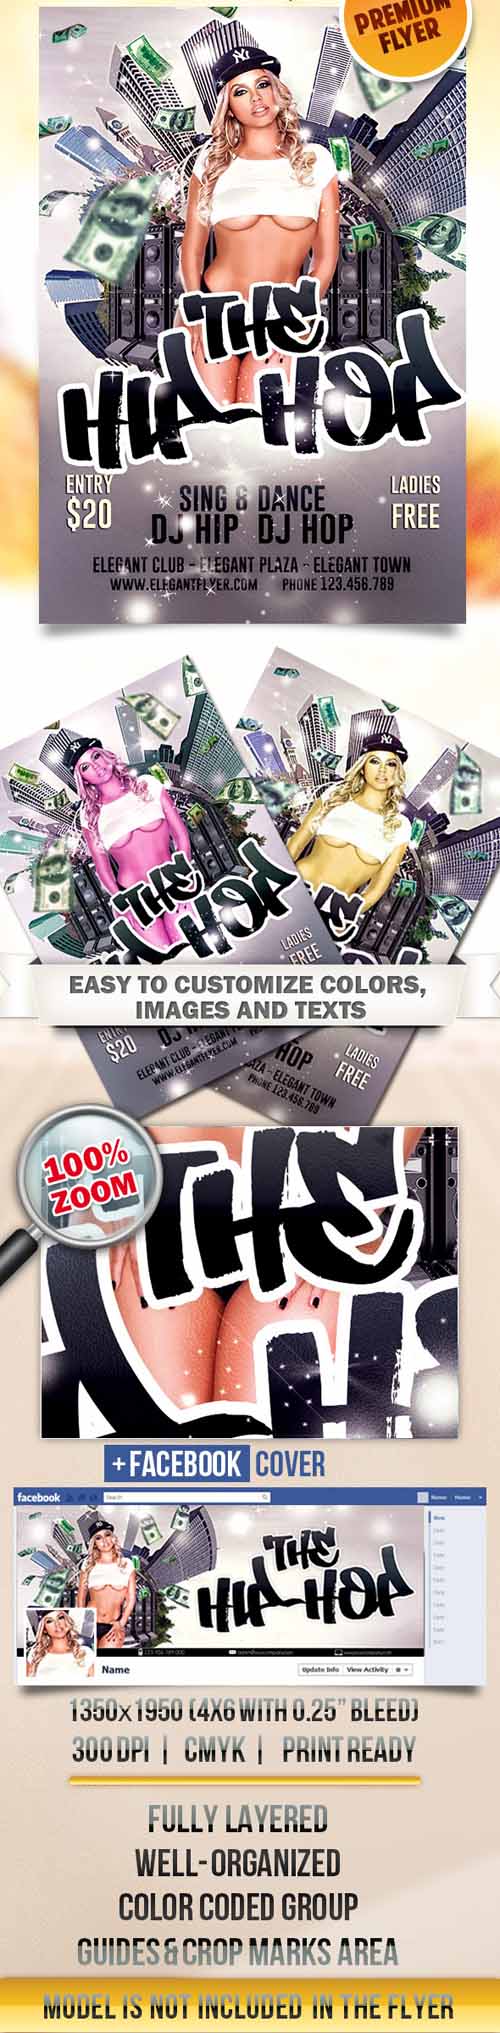 Flyer PSD Template - The Hip-Hop Party + Facebook Cover 5